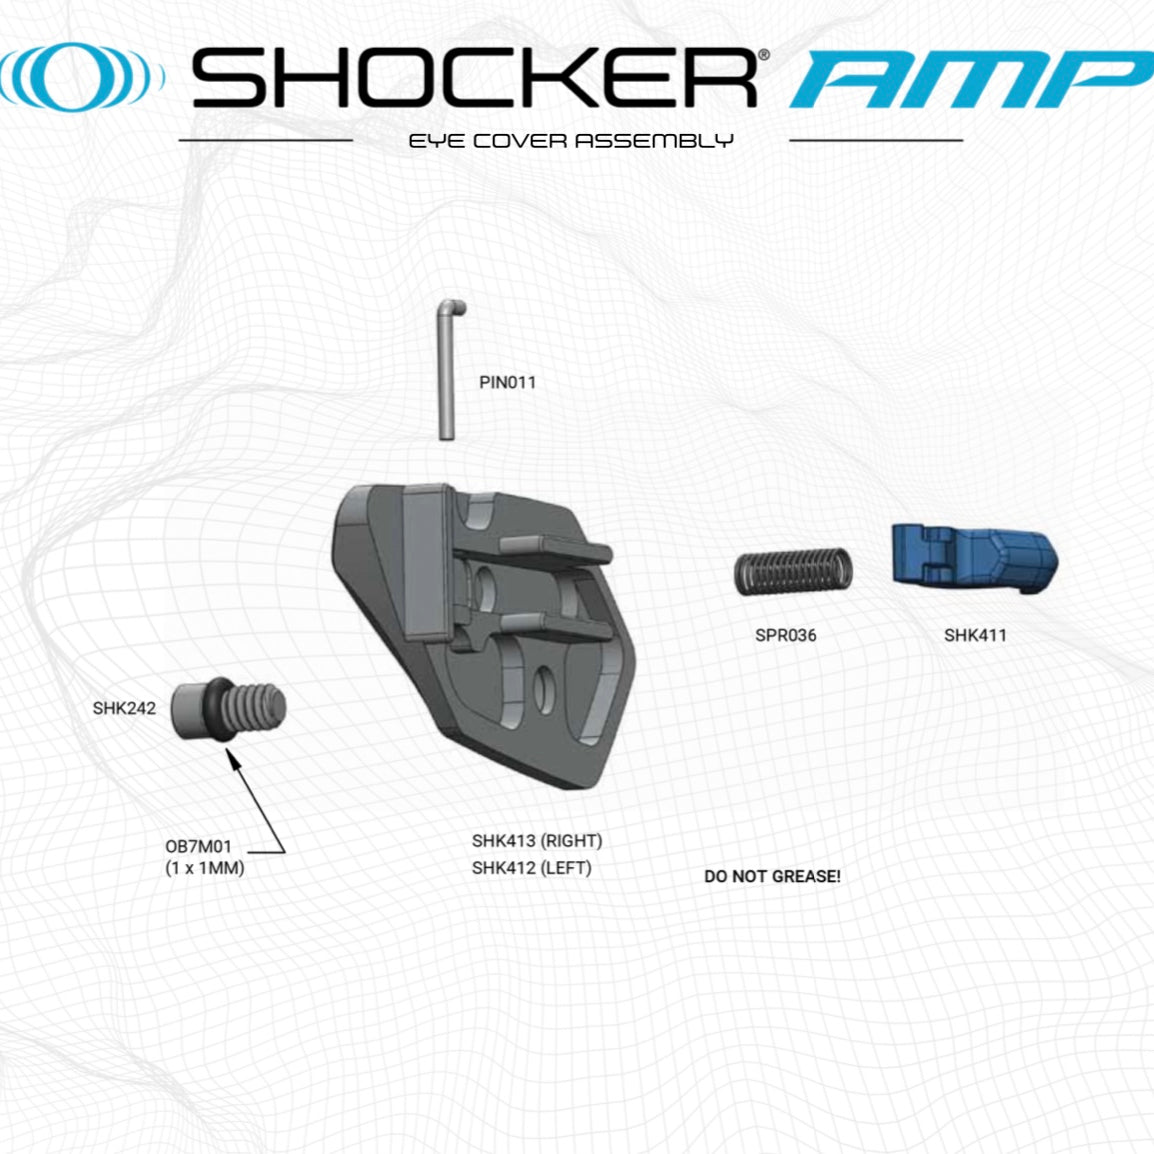 SP Shocker Amp Eye Cover Assembly Parts List - Pick the Part You Need!